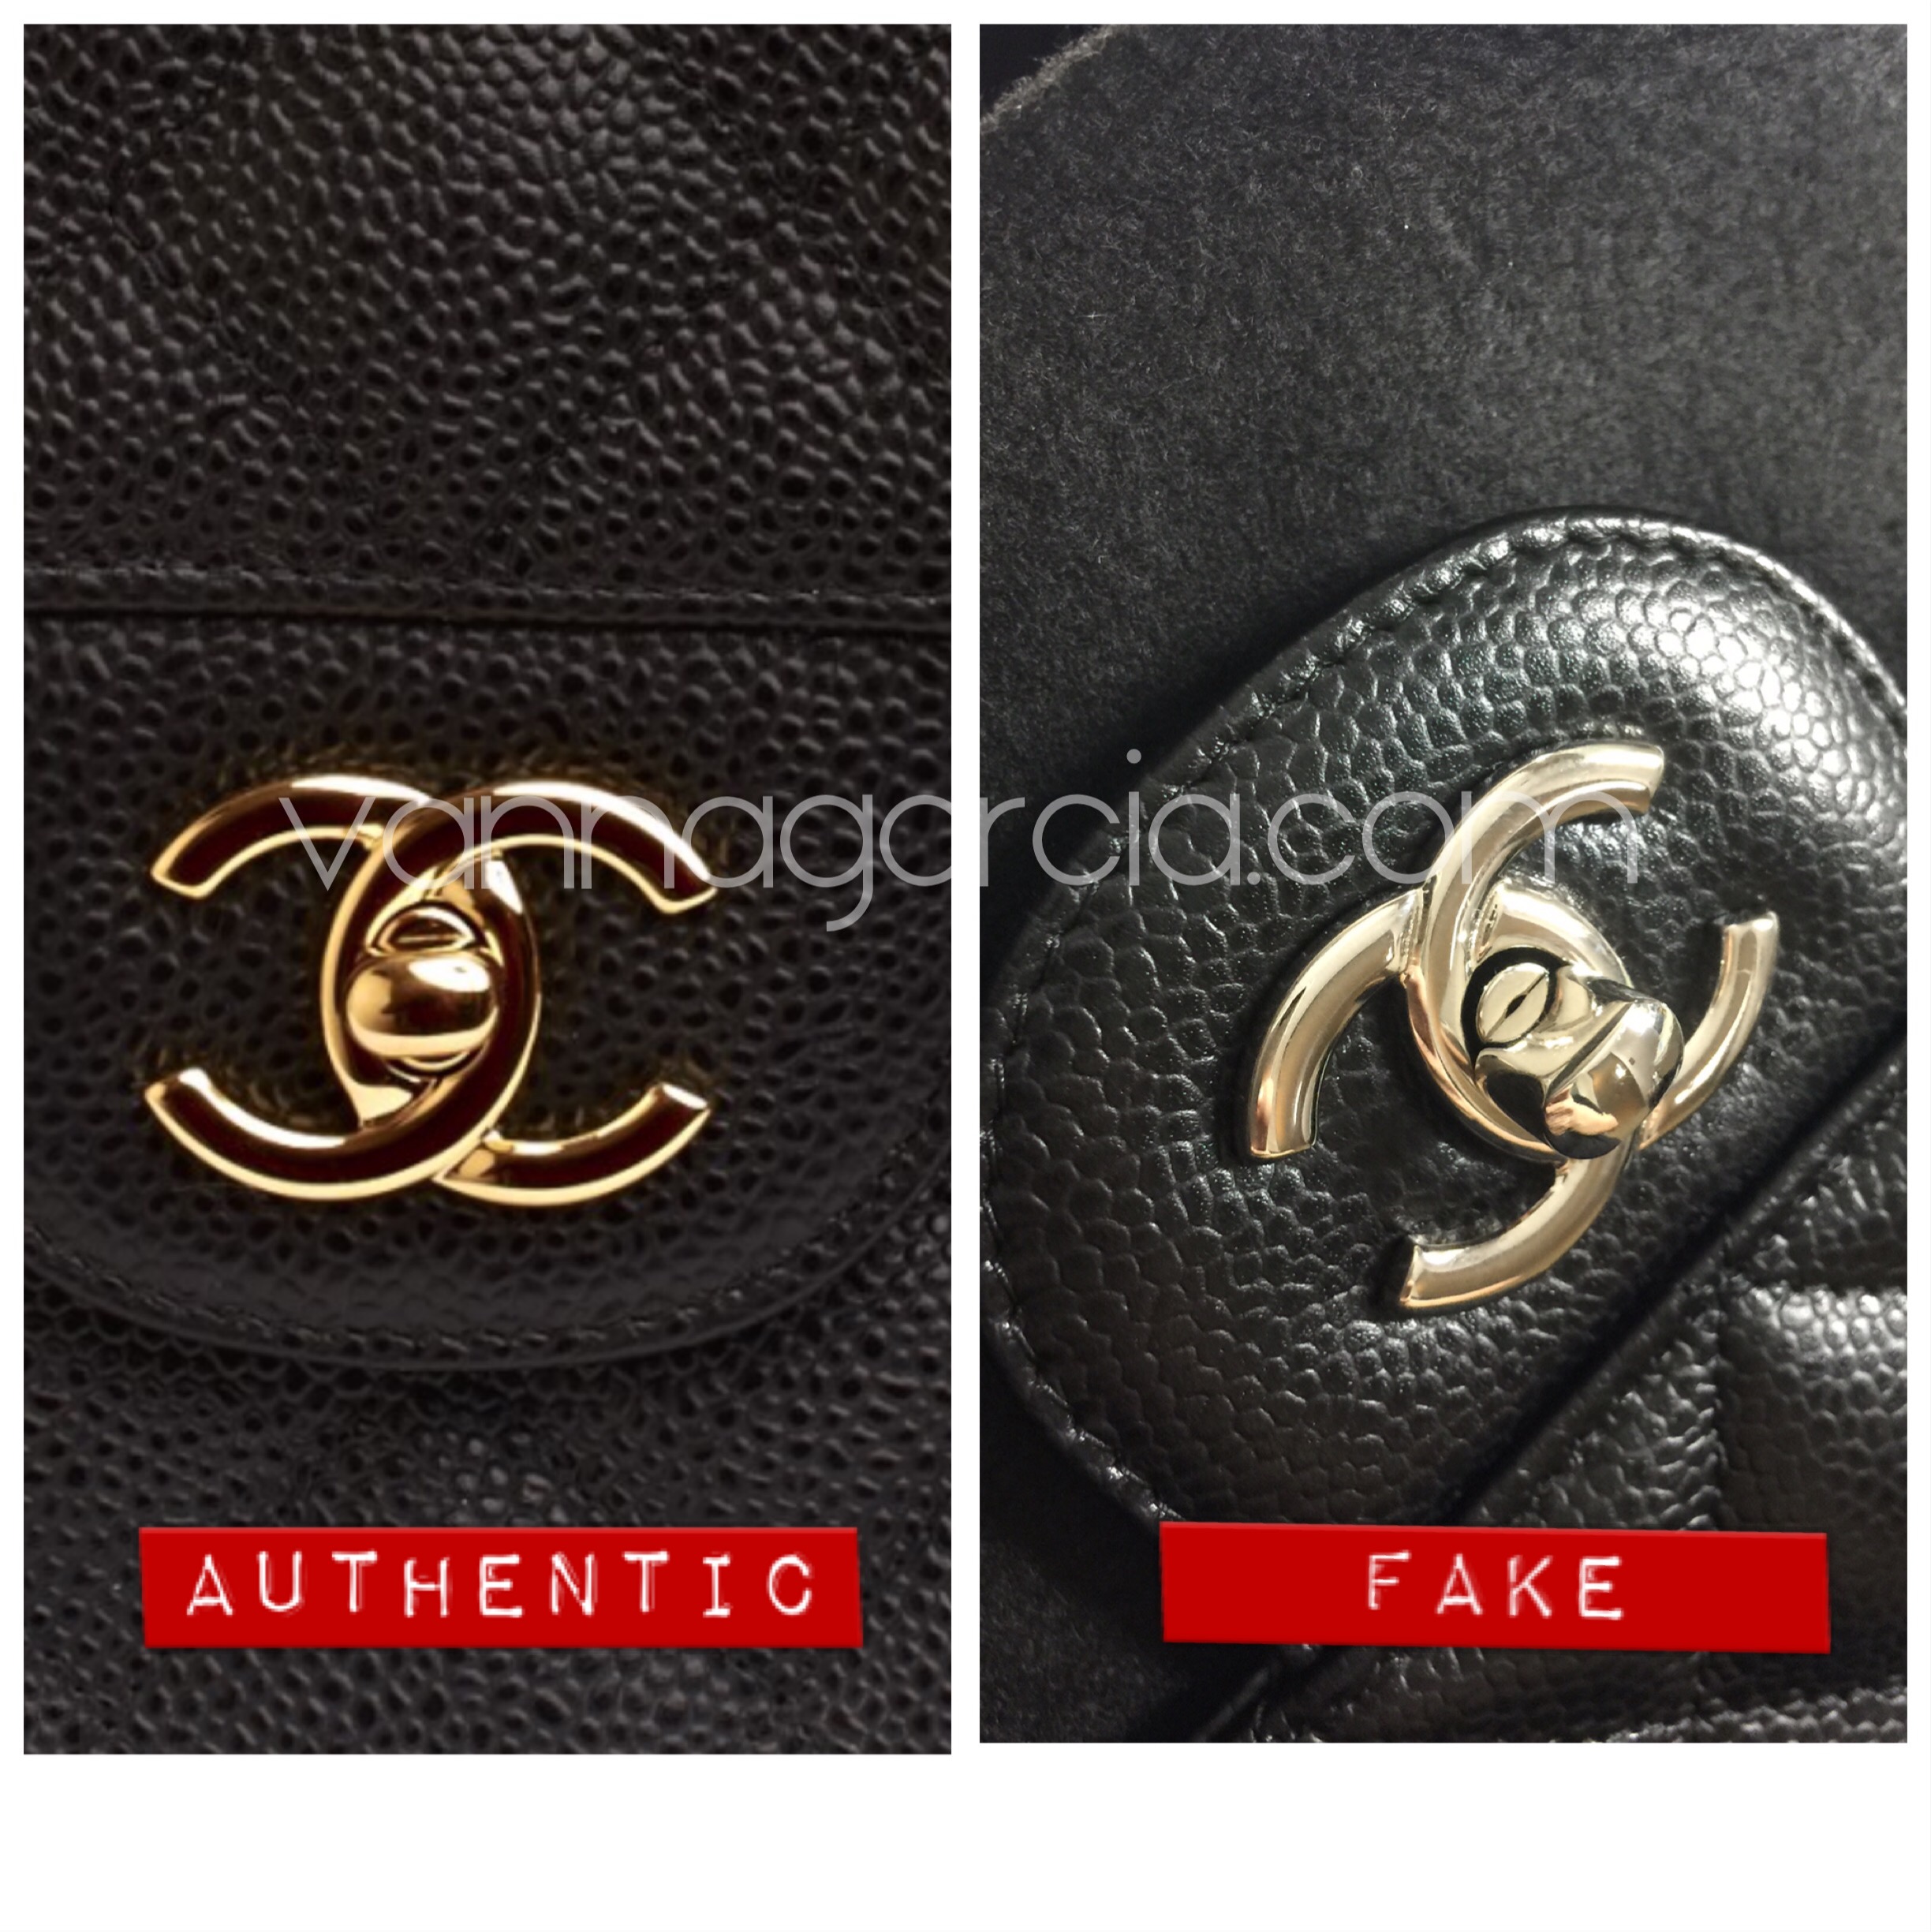 Some Tips to Find out Authenticity of Chanel Bags